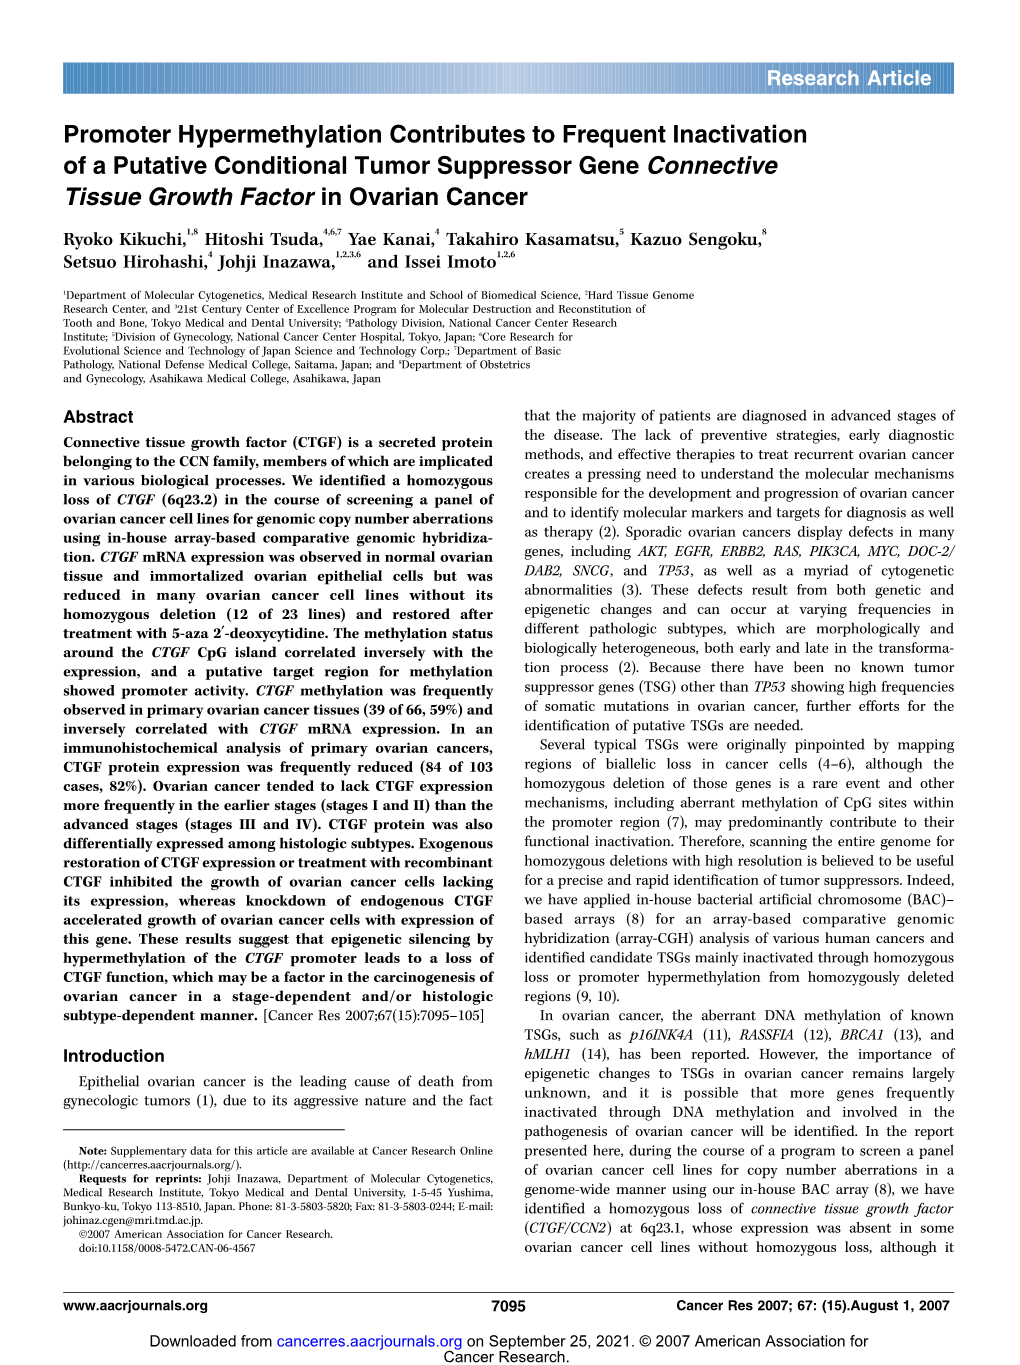 Promoter Hypermethylation Contributes to Frequent Inactivation of a Putative Conditional Tumor Suppressor Gene Connective Tissue Growth Factor in Ovarian Cancer